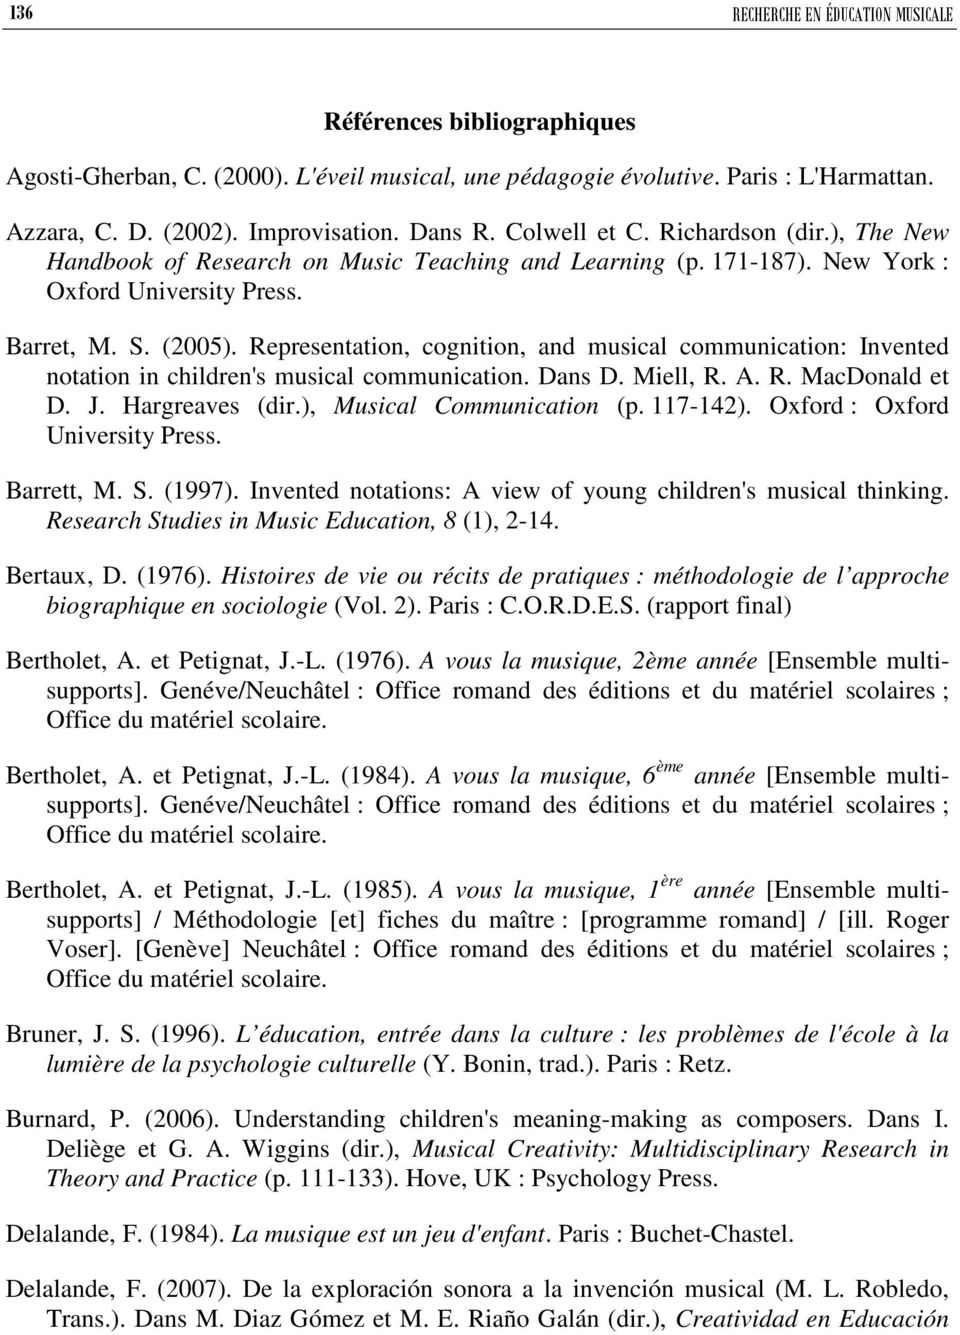 Representation, cognition, and musical communication: Invented notation in children's musical communication. Dans D. Miell, R. A. R. MacDonald et D. J. Hargreaves (dir.), Musical Communication (p.